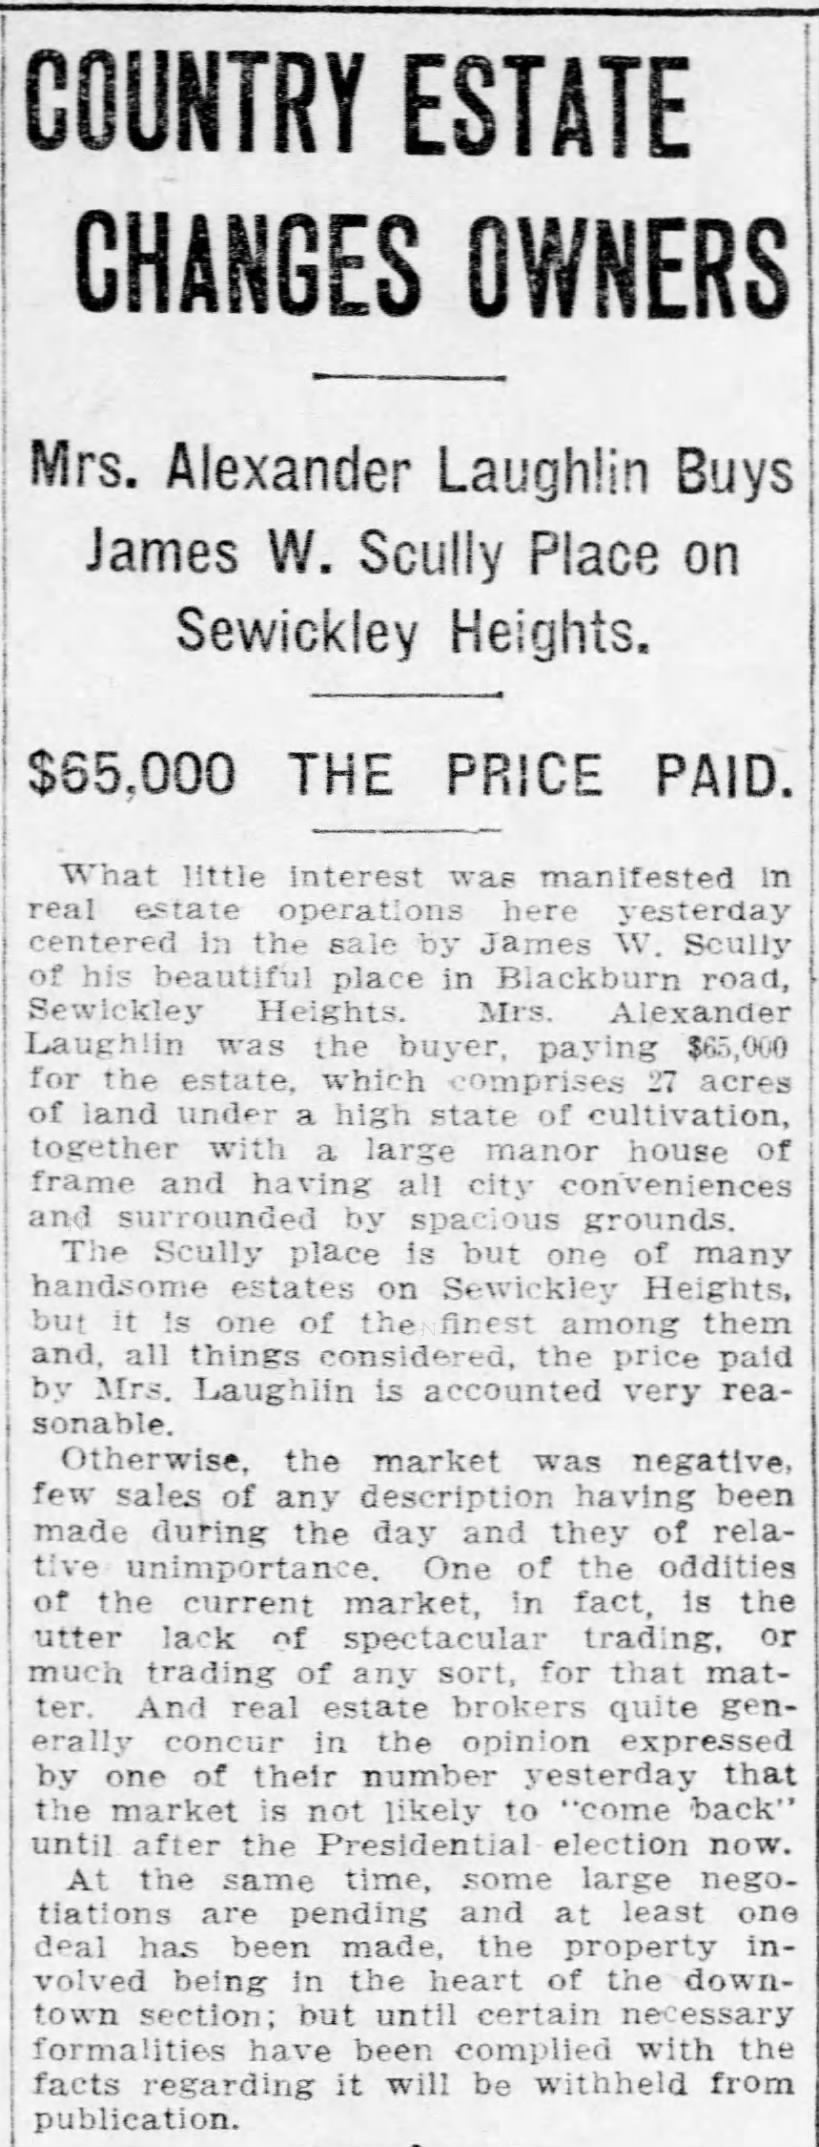 Mrs. Alexander Laughlin buys Sewickley Heights country home of James W. Scully for $65,000.